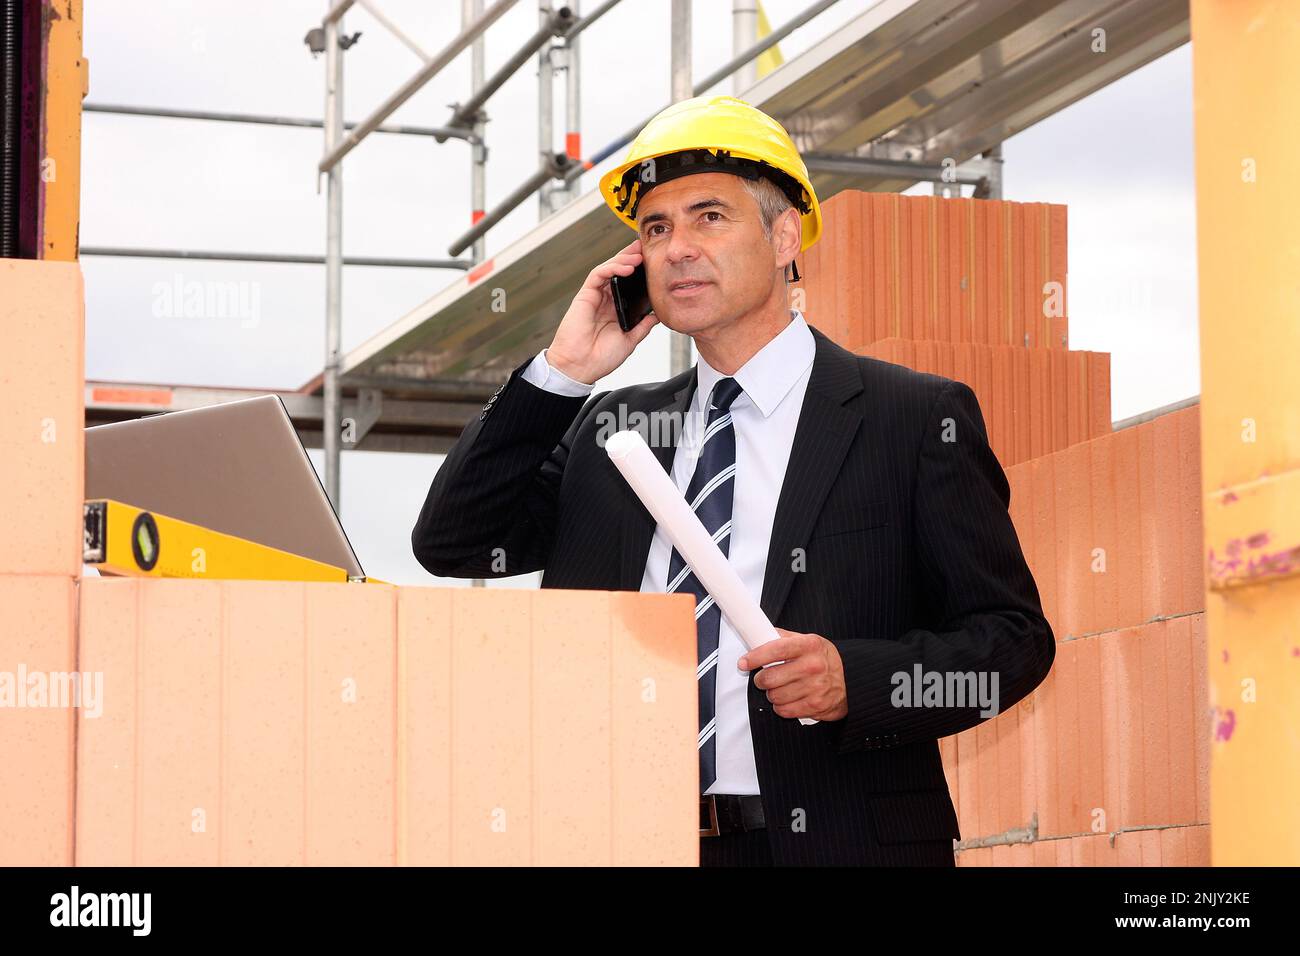 architect on the phone at the building site Stock Photo